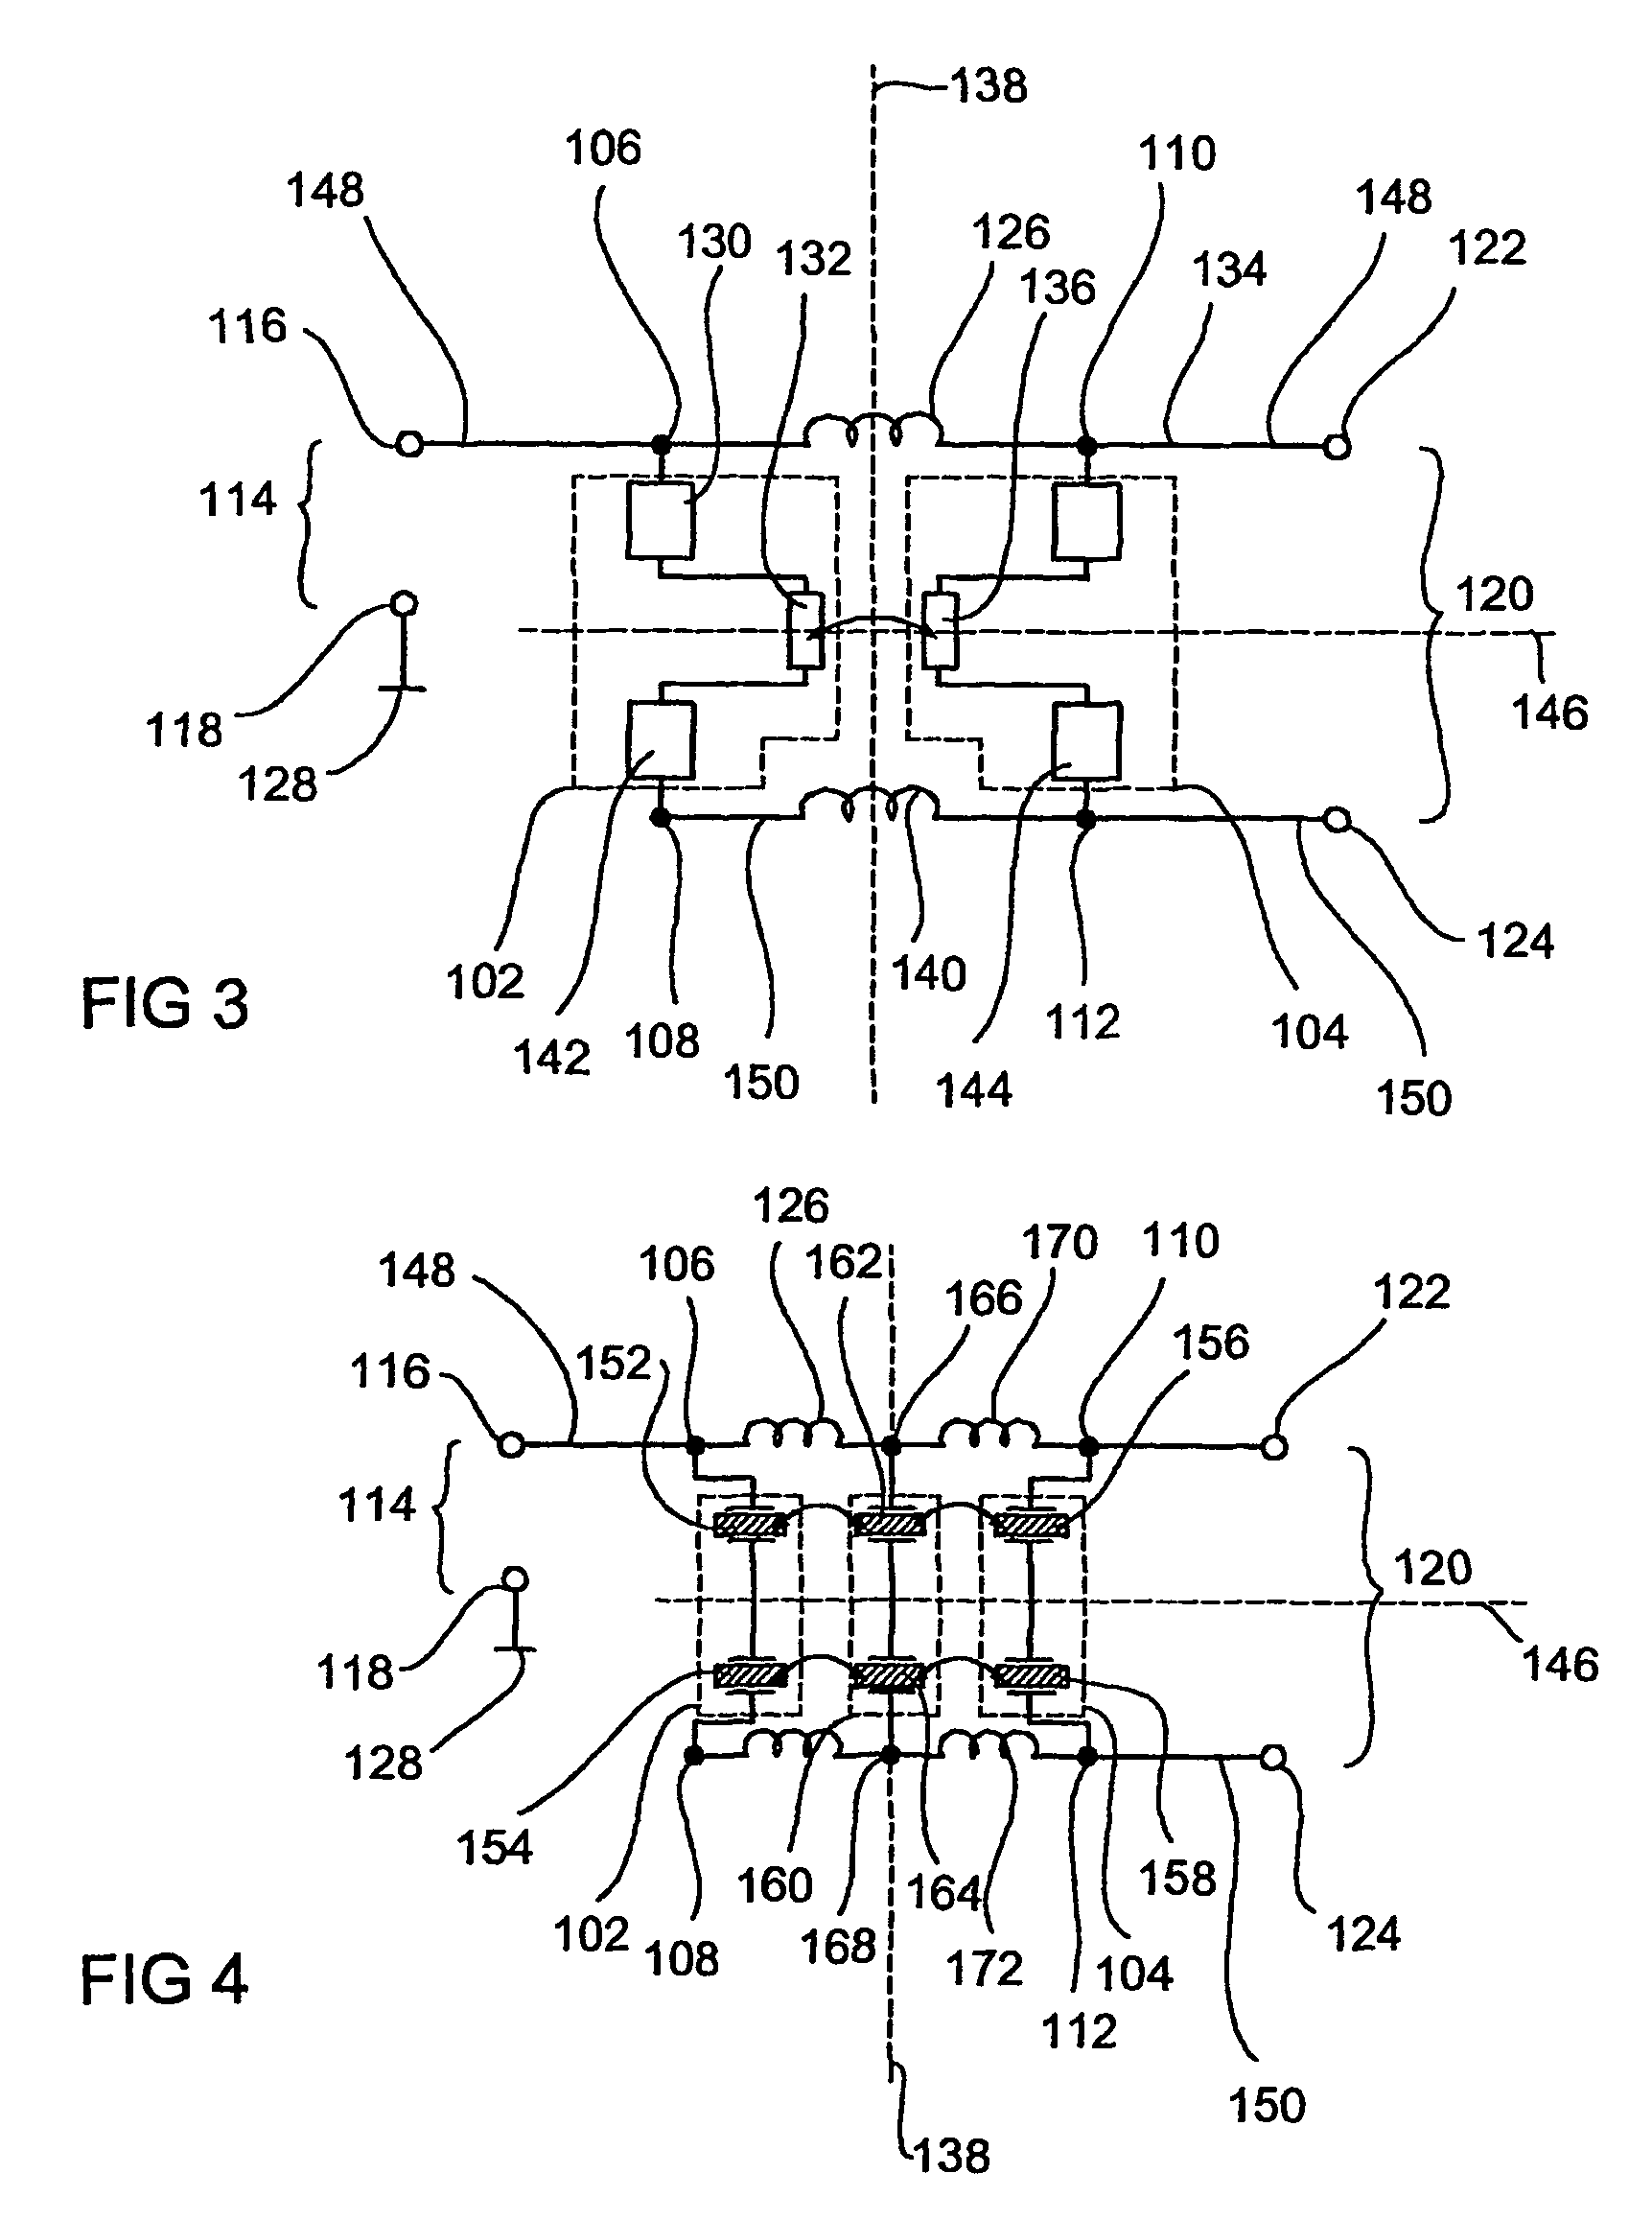 Filter arrangement for balanced and unbalanced line systems